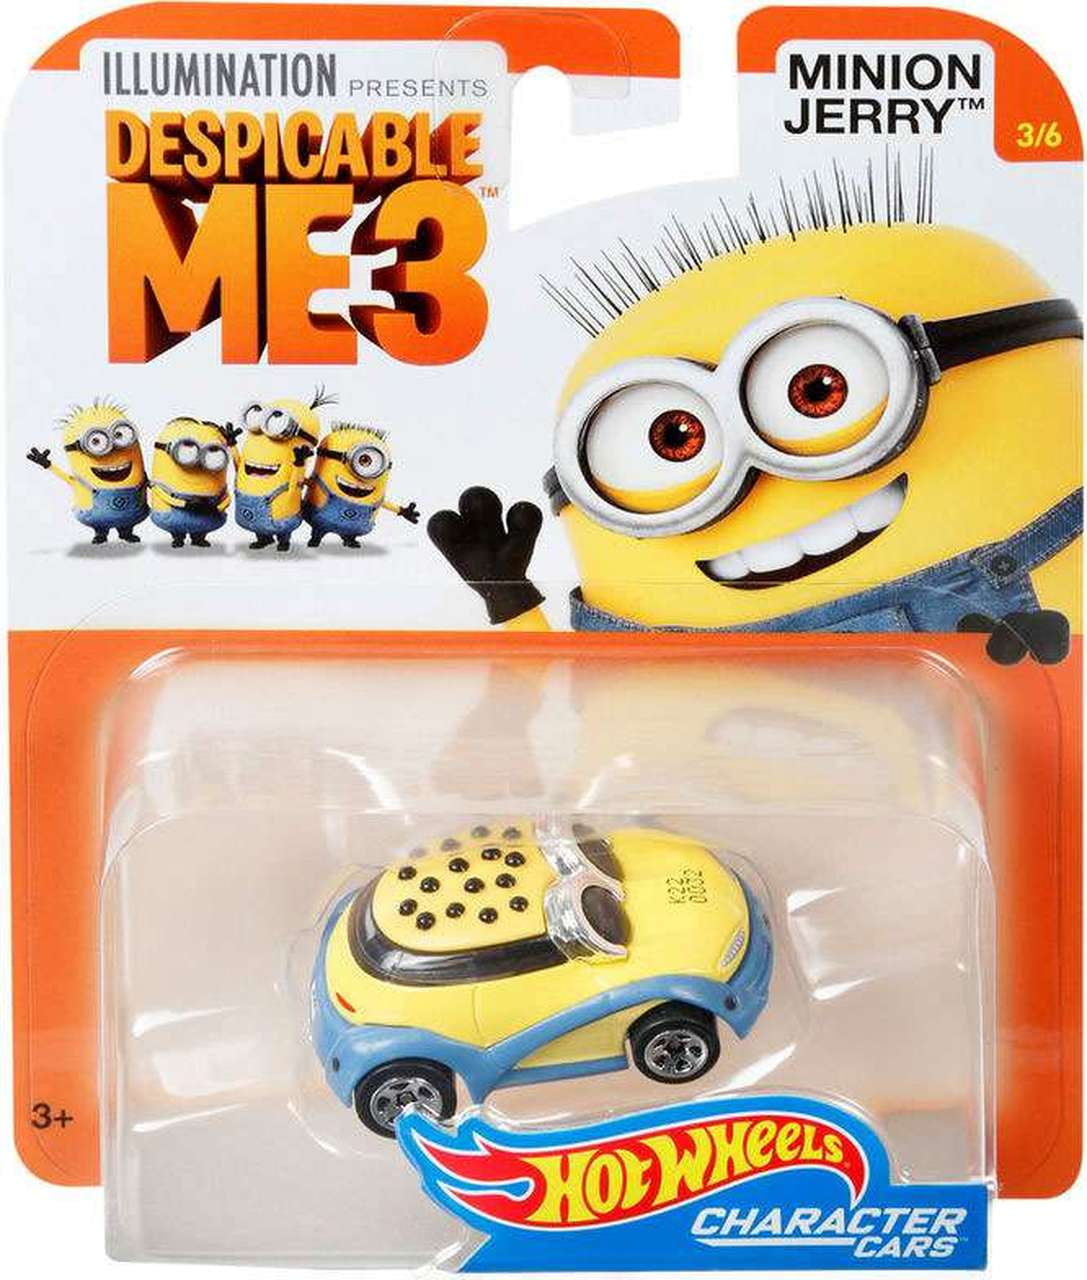 A HOT WHEELS 2020 CHARACTER CARS Pick and choose!! MINIONS THE RISE OF GRU 